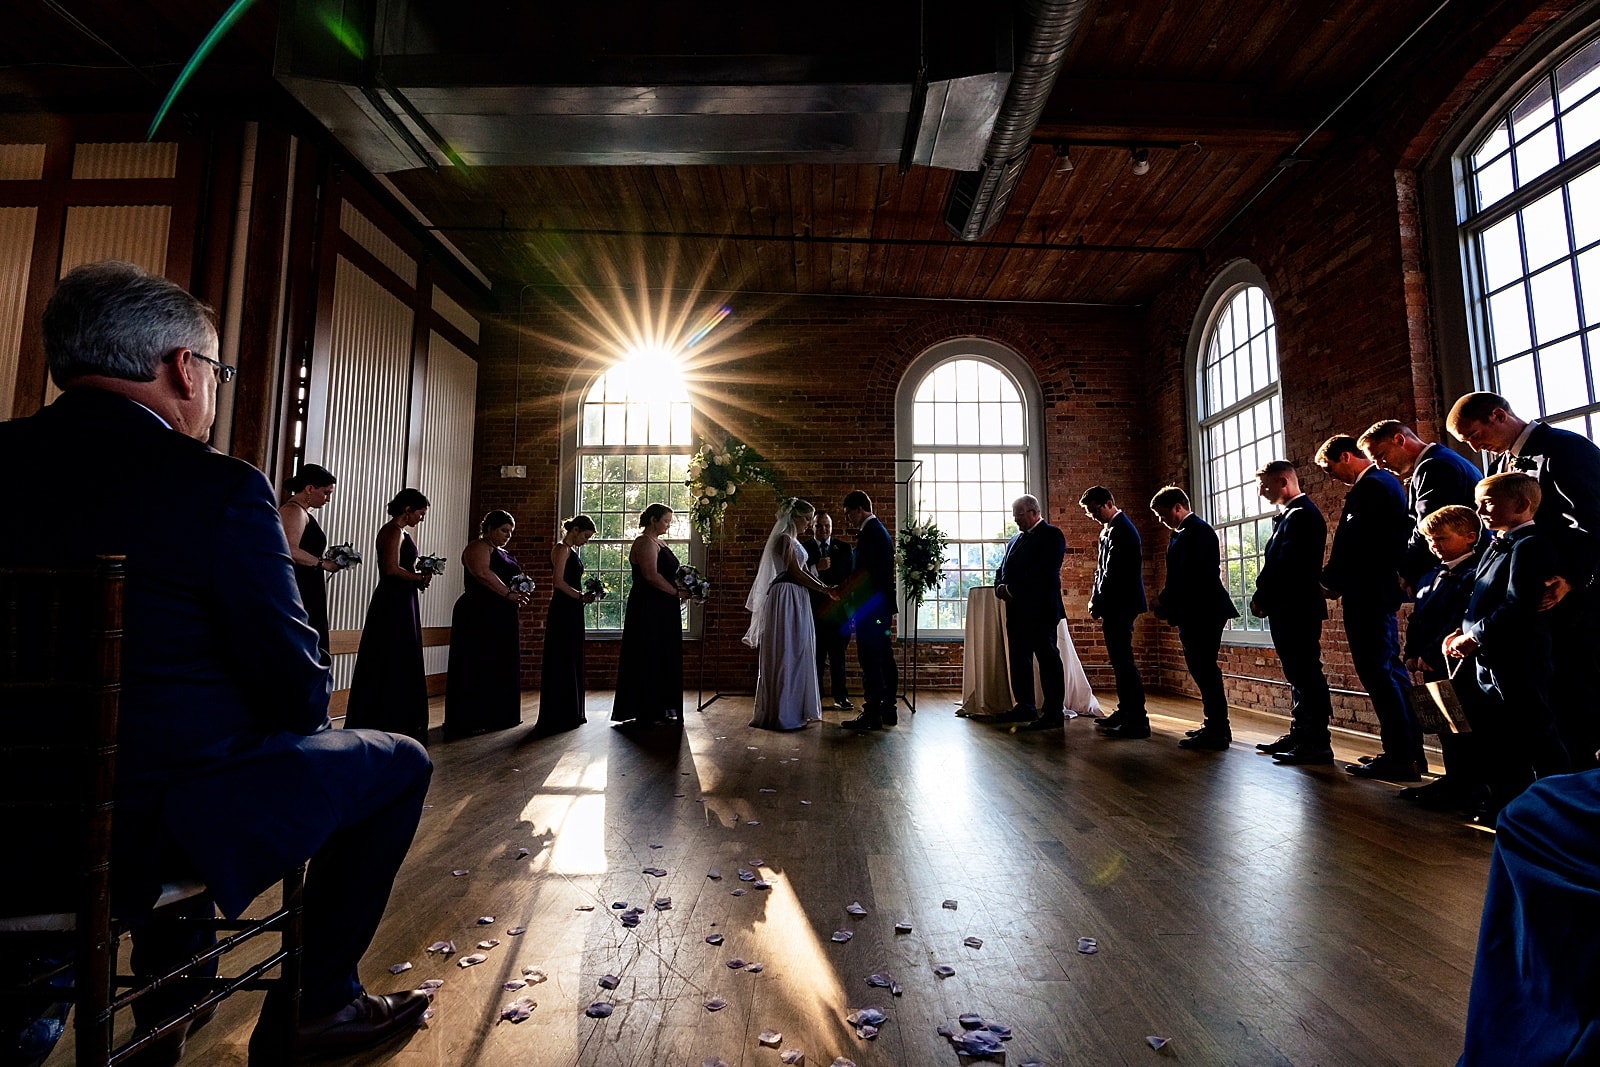 the sun pokes through one of The Cotton Room's large windows during a wedding ceremony